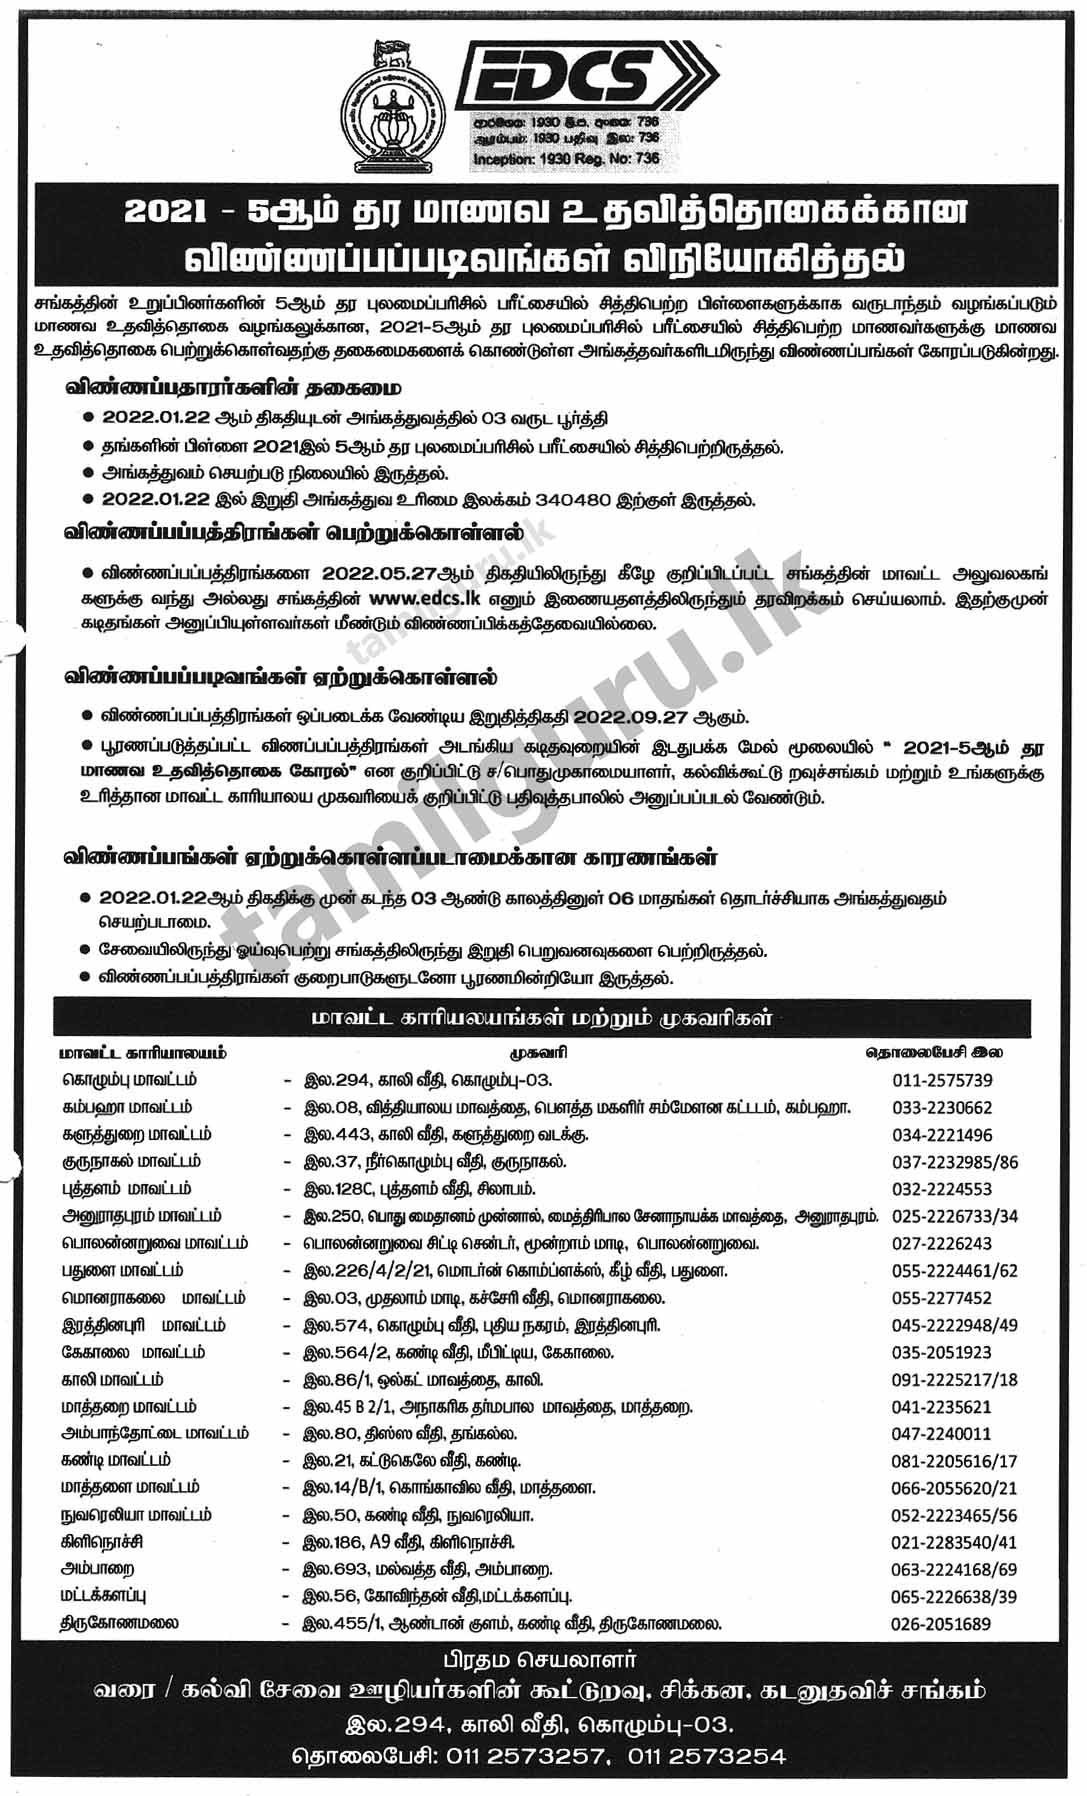 Grade 05 Scholarship Awards Scheme 2021 (2022) - Education Employees Cooperative Thrift and Credit Society (EDCS) (Details in Tamil)